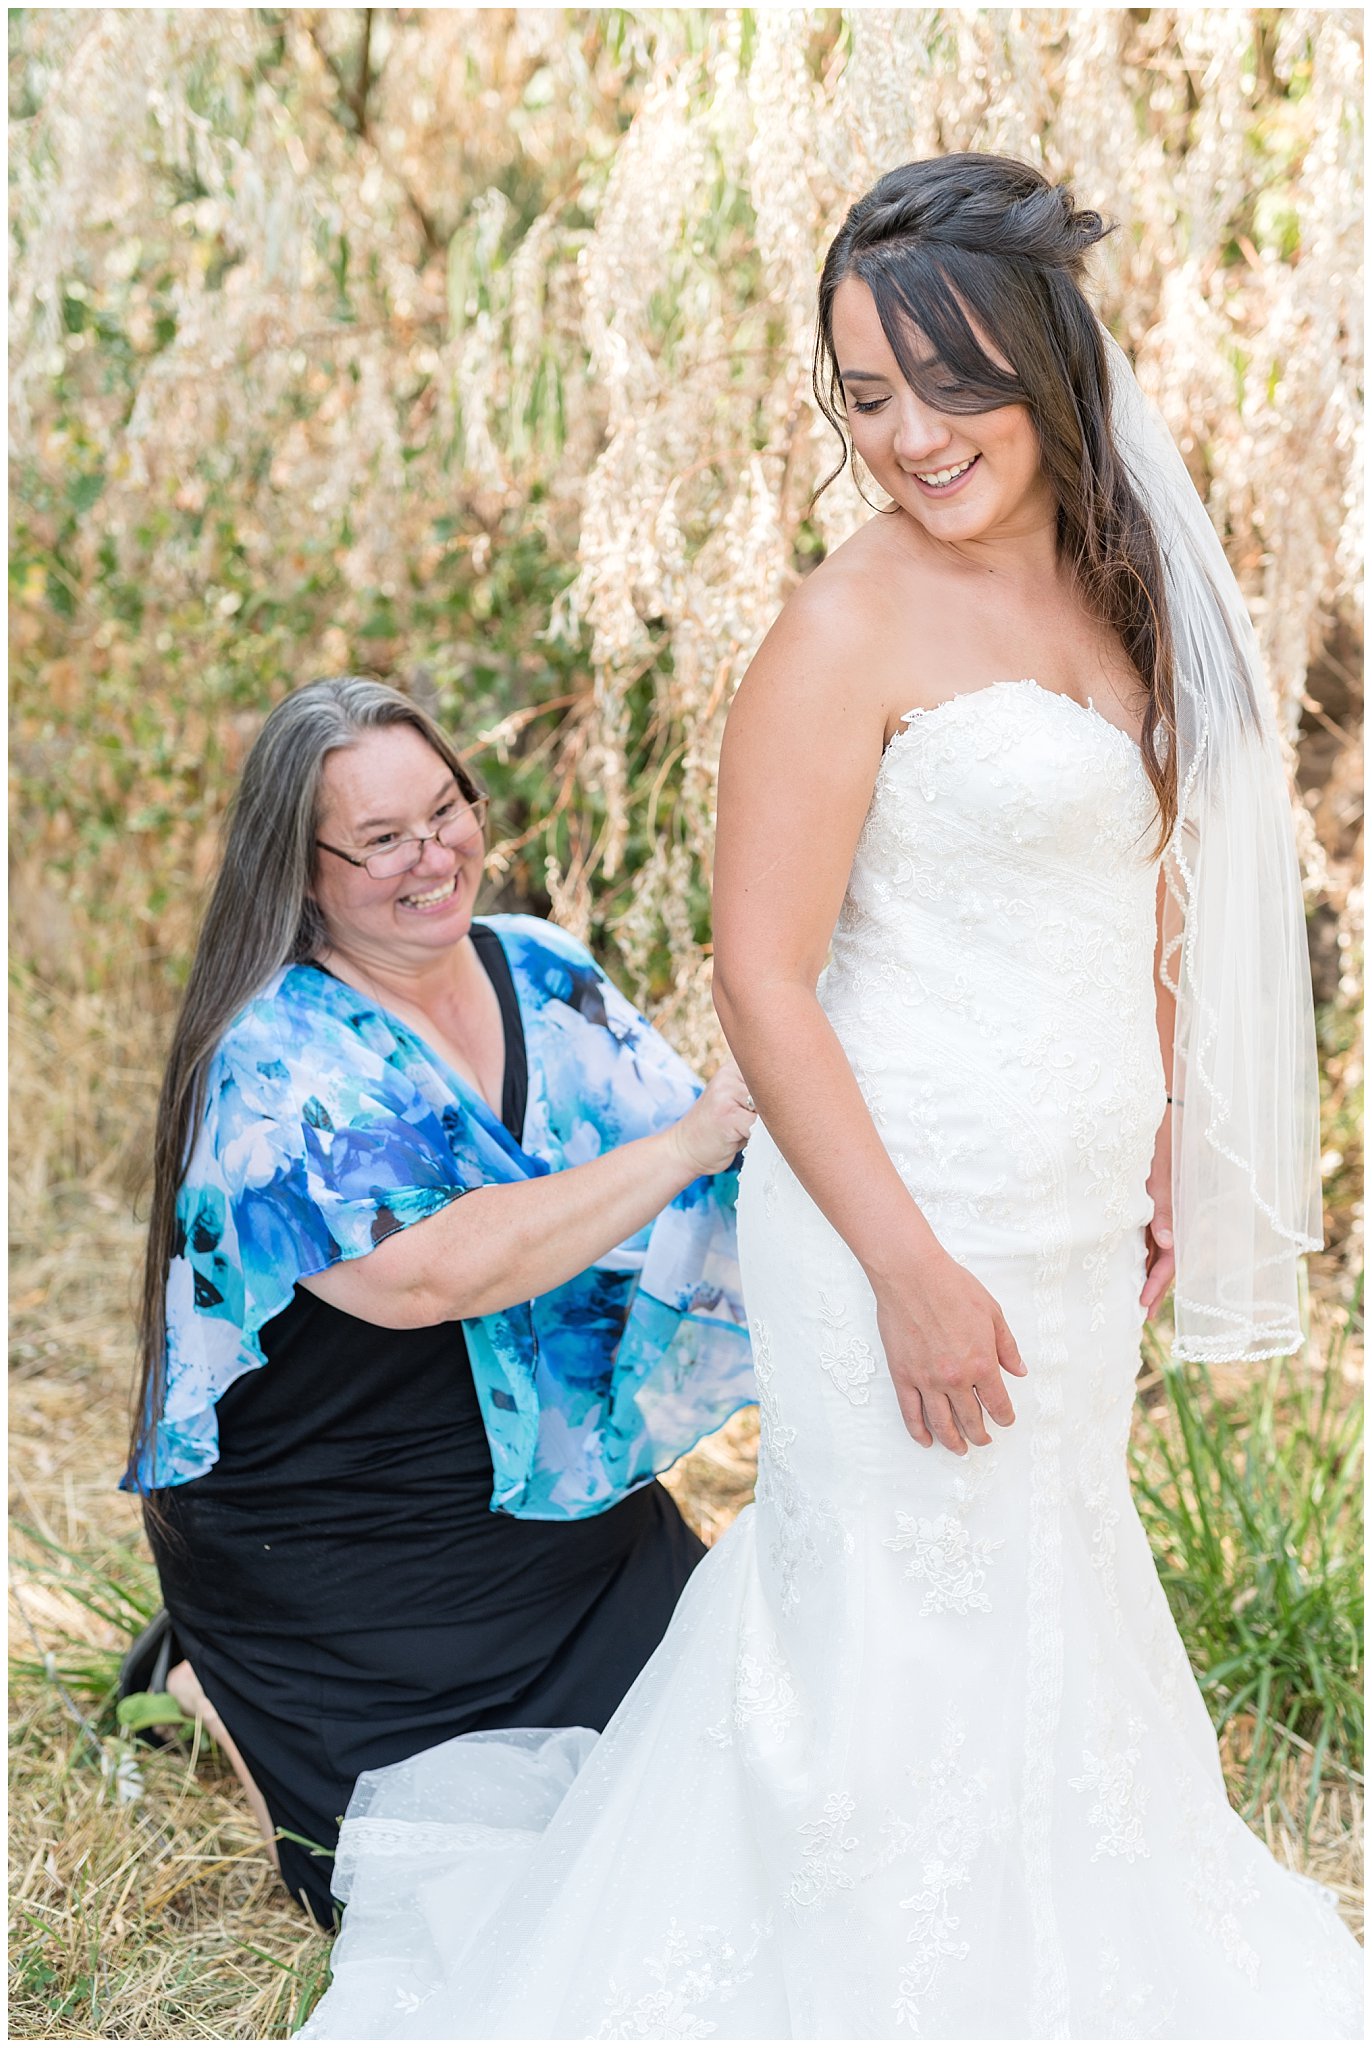 Mother of the Bride smiling and buttoning up back of wedding dress | Davis County Outdoor Wedding | Jessie and Dallin Photography